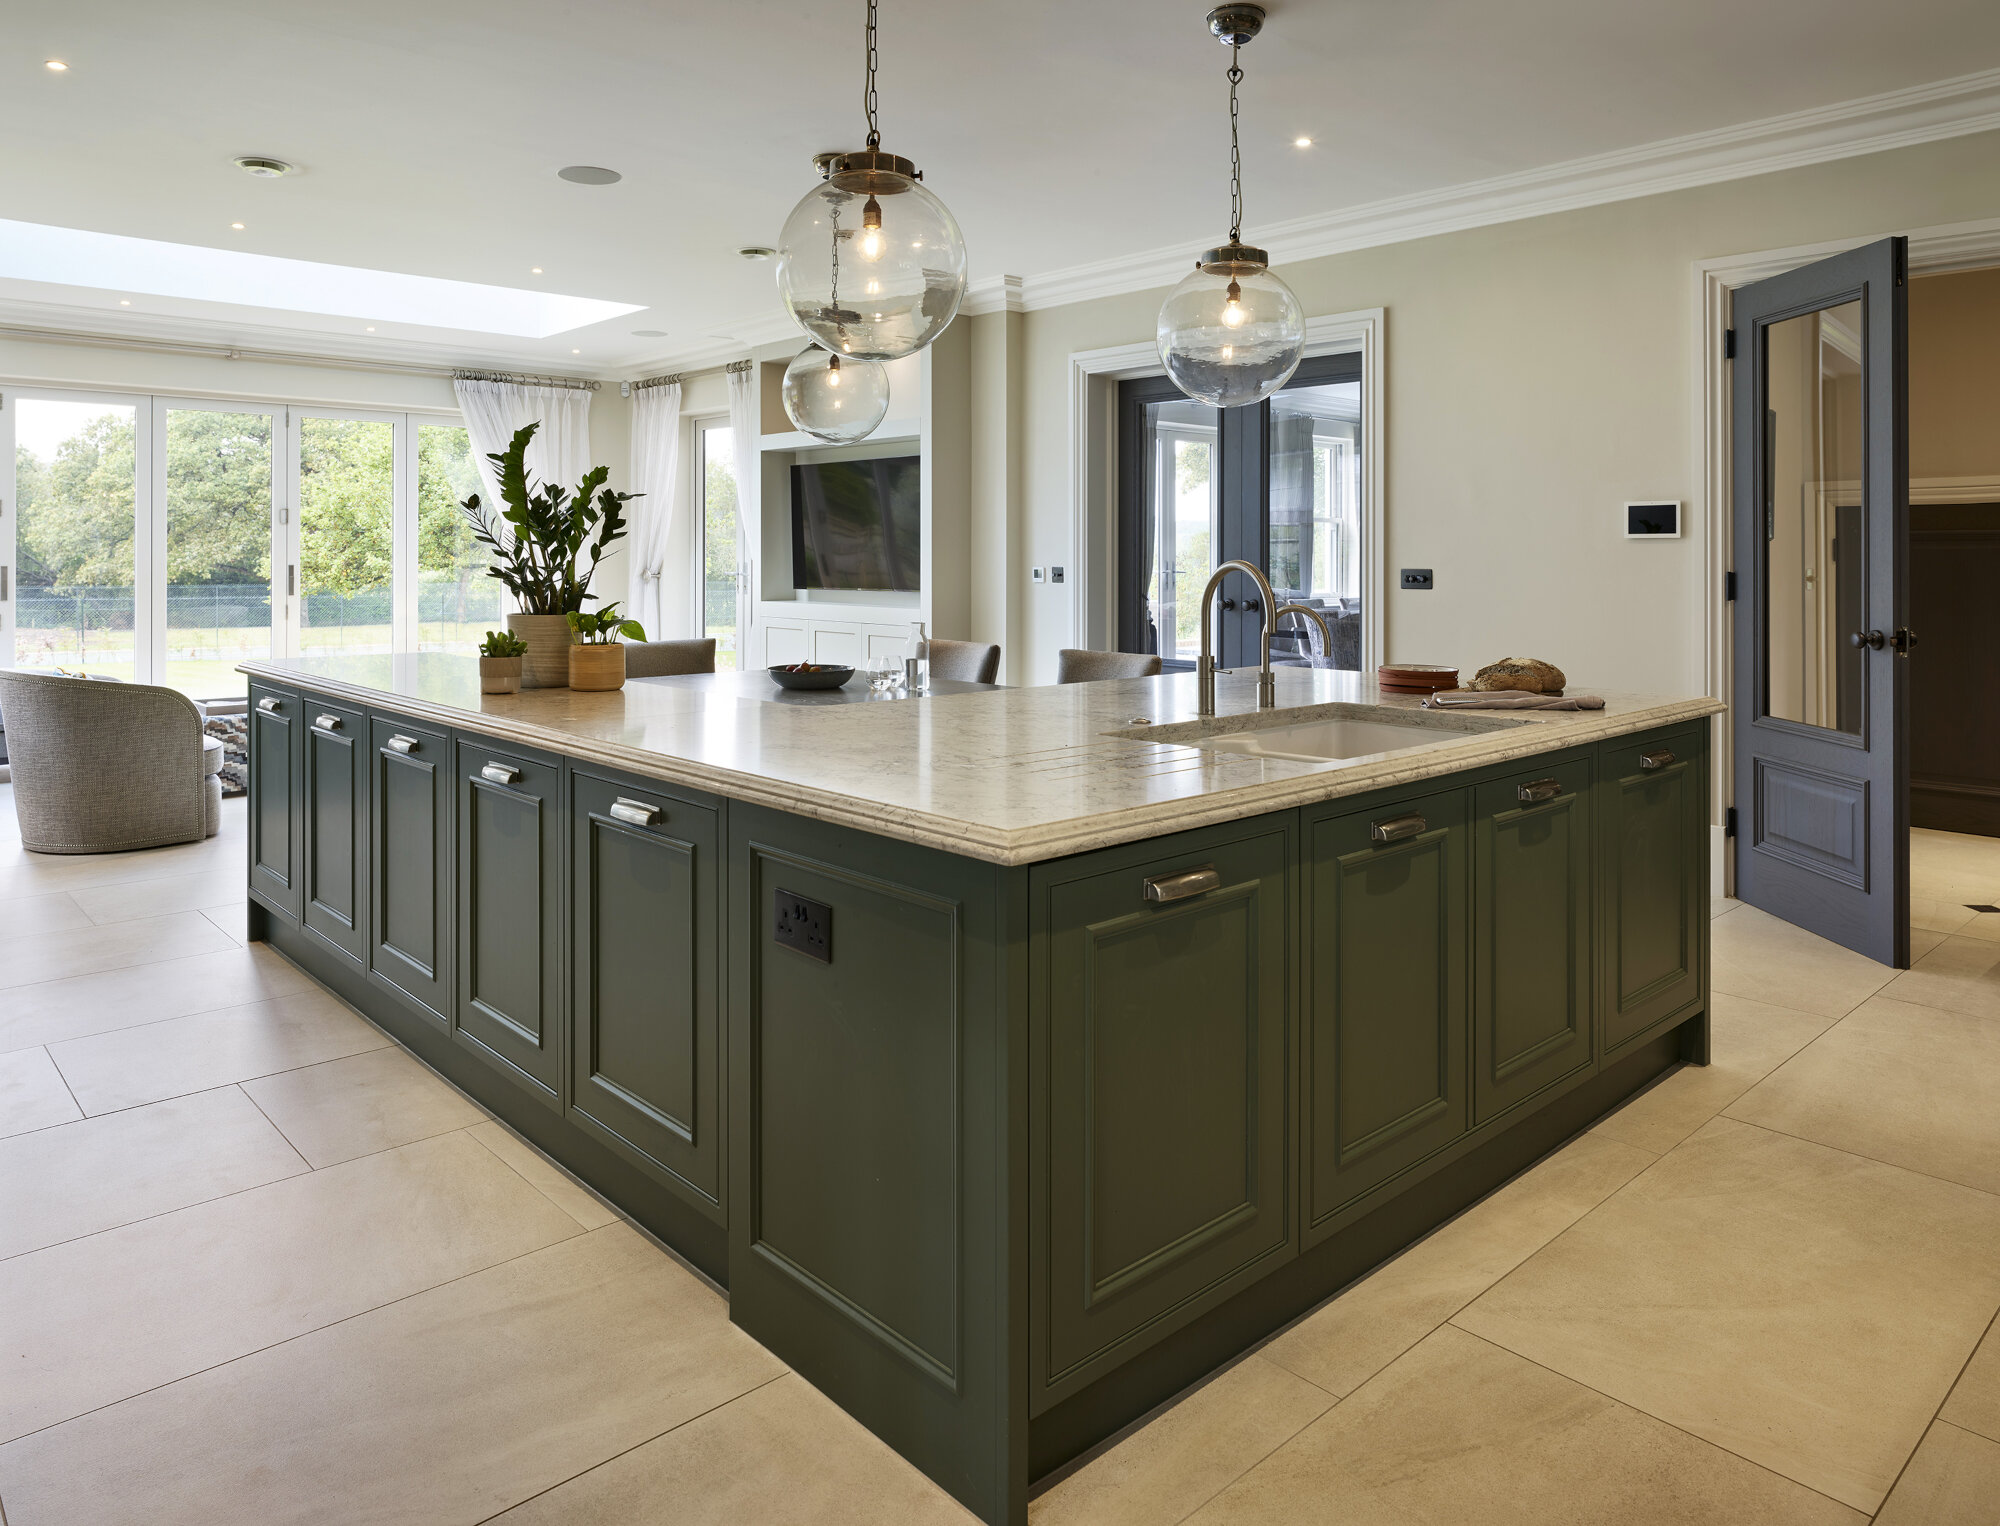 High End traditional Kitchens In Worksop